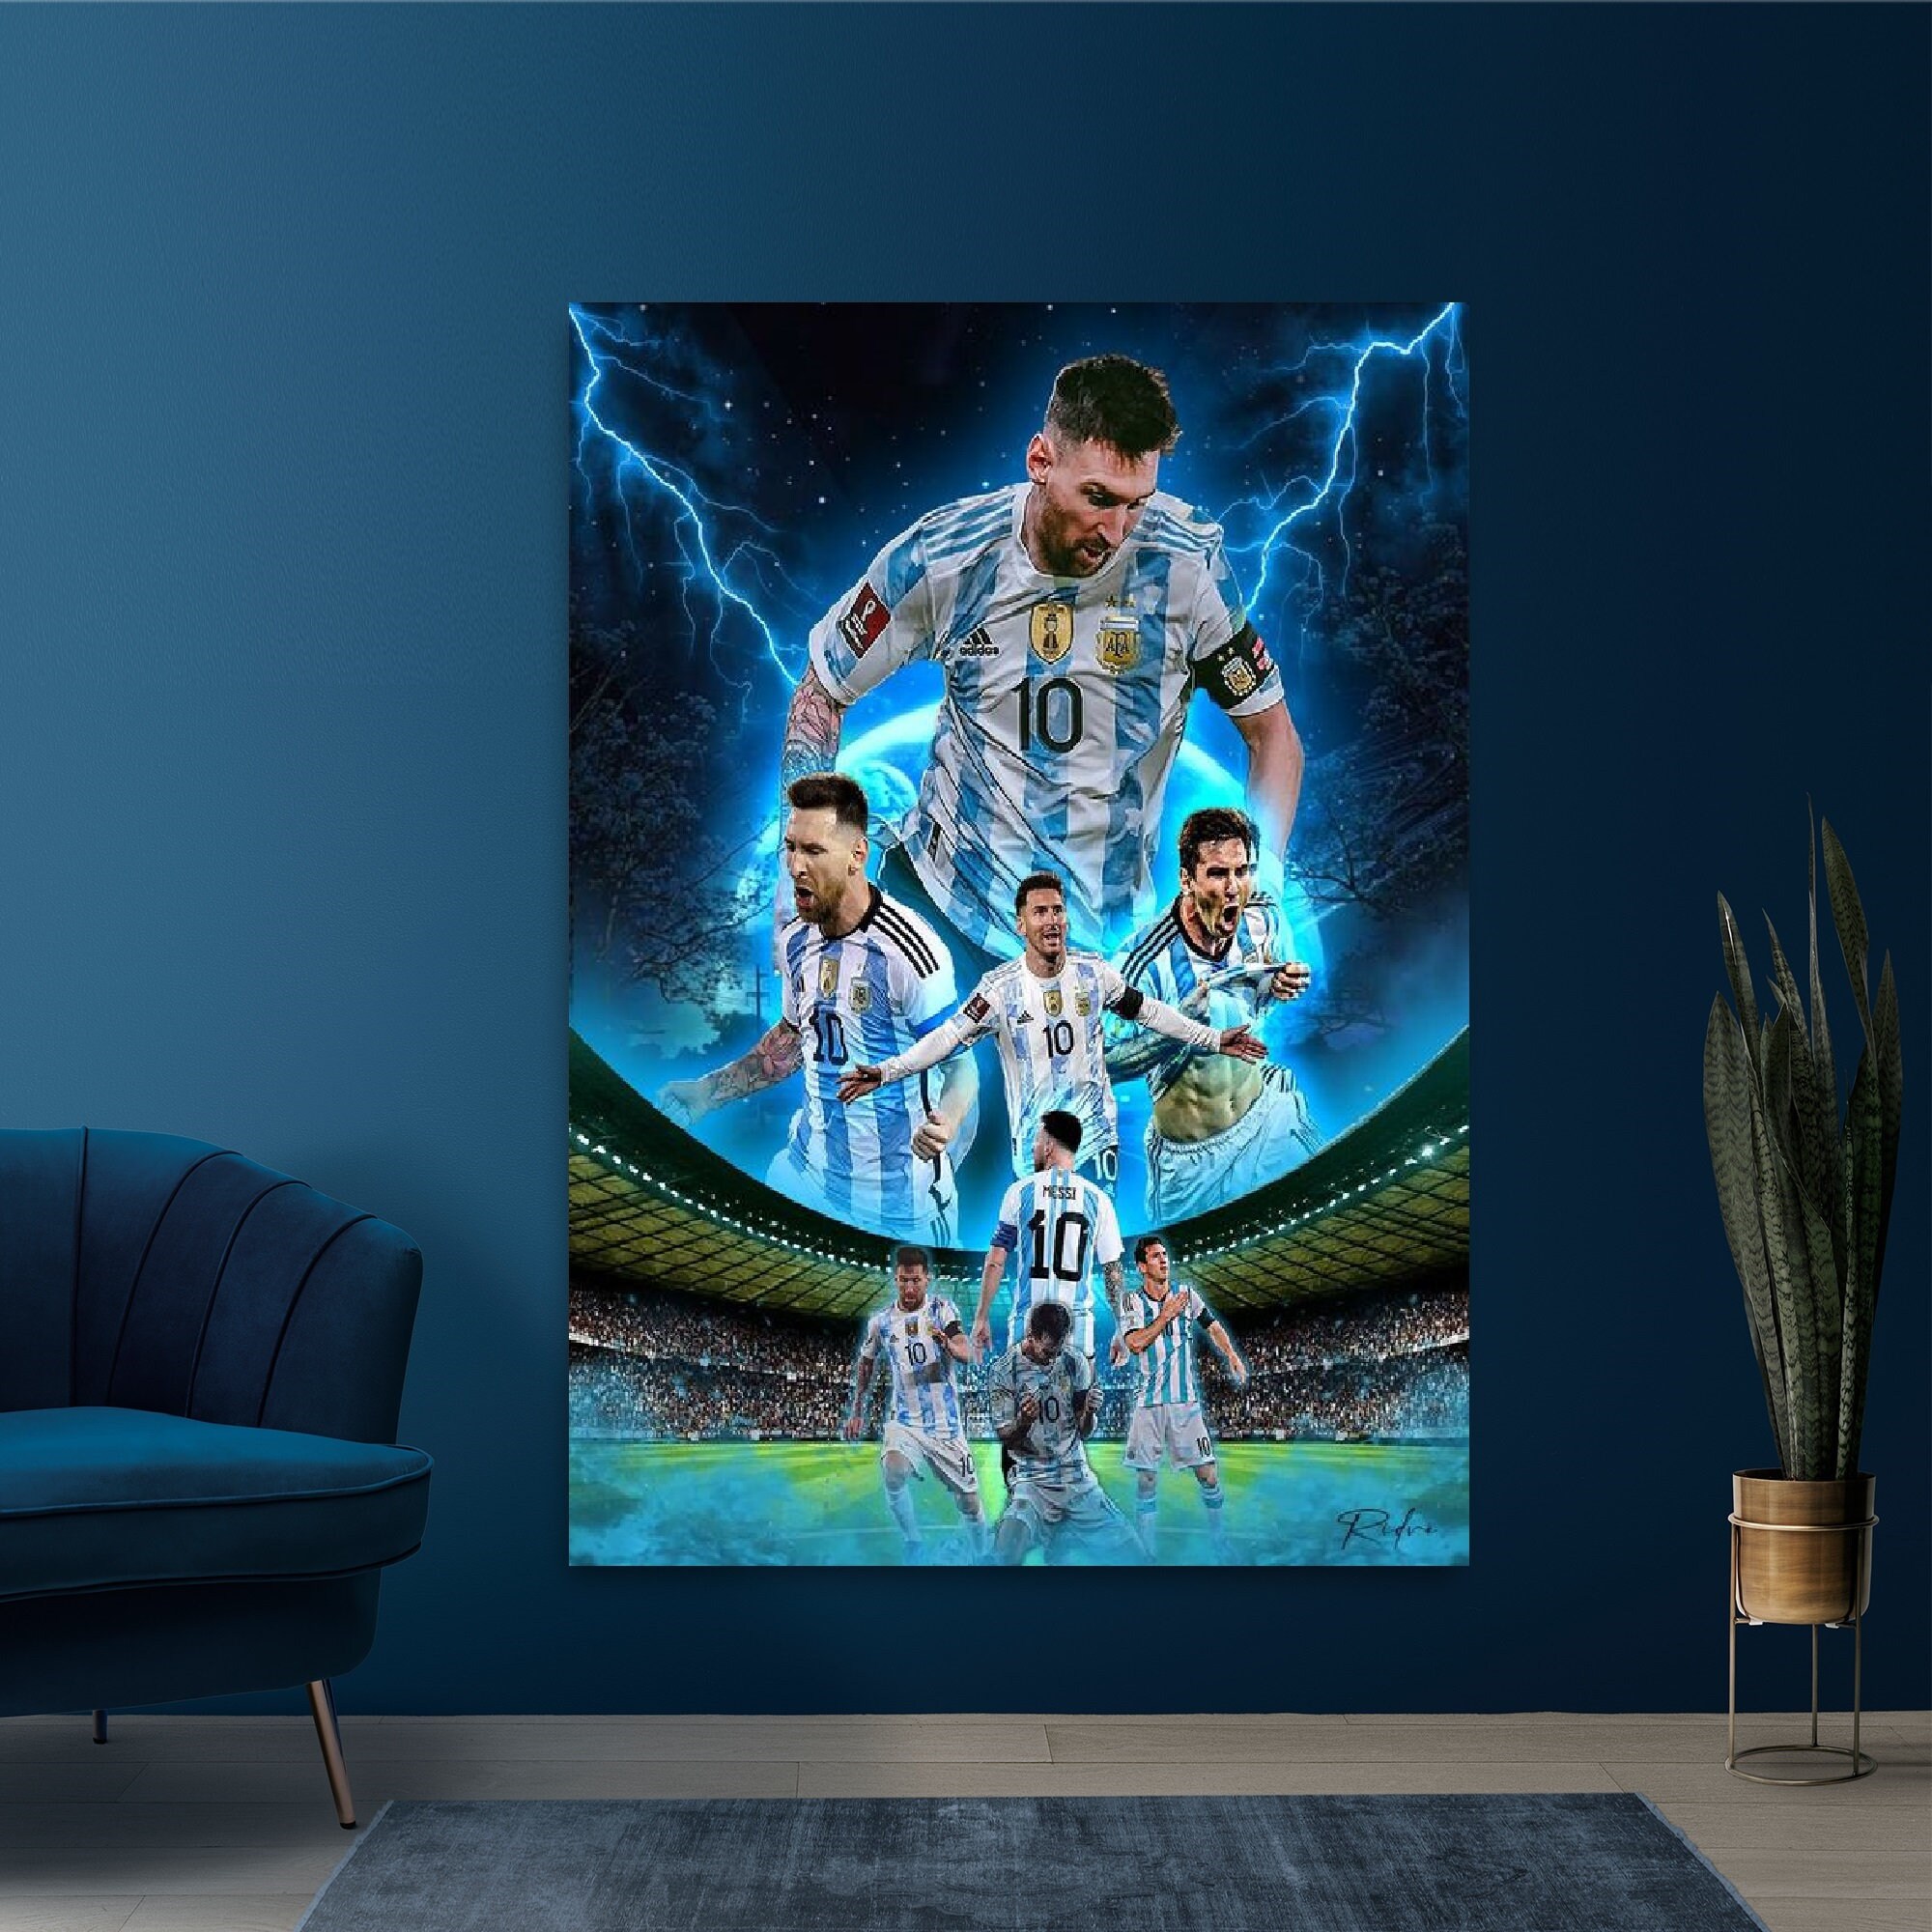  HAITUN Football Legends Messi & Ronaldo Chess Soccer Player  Poster Artworks Picture Print Poster Wall Art Painting Canvas Gift Decor  Home Posters Decorative 20x30inch(50x75cm) : Sports & Outdoors